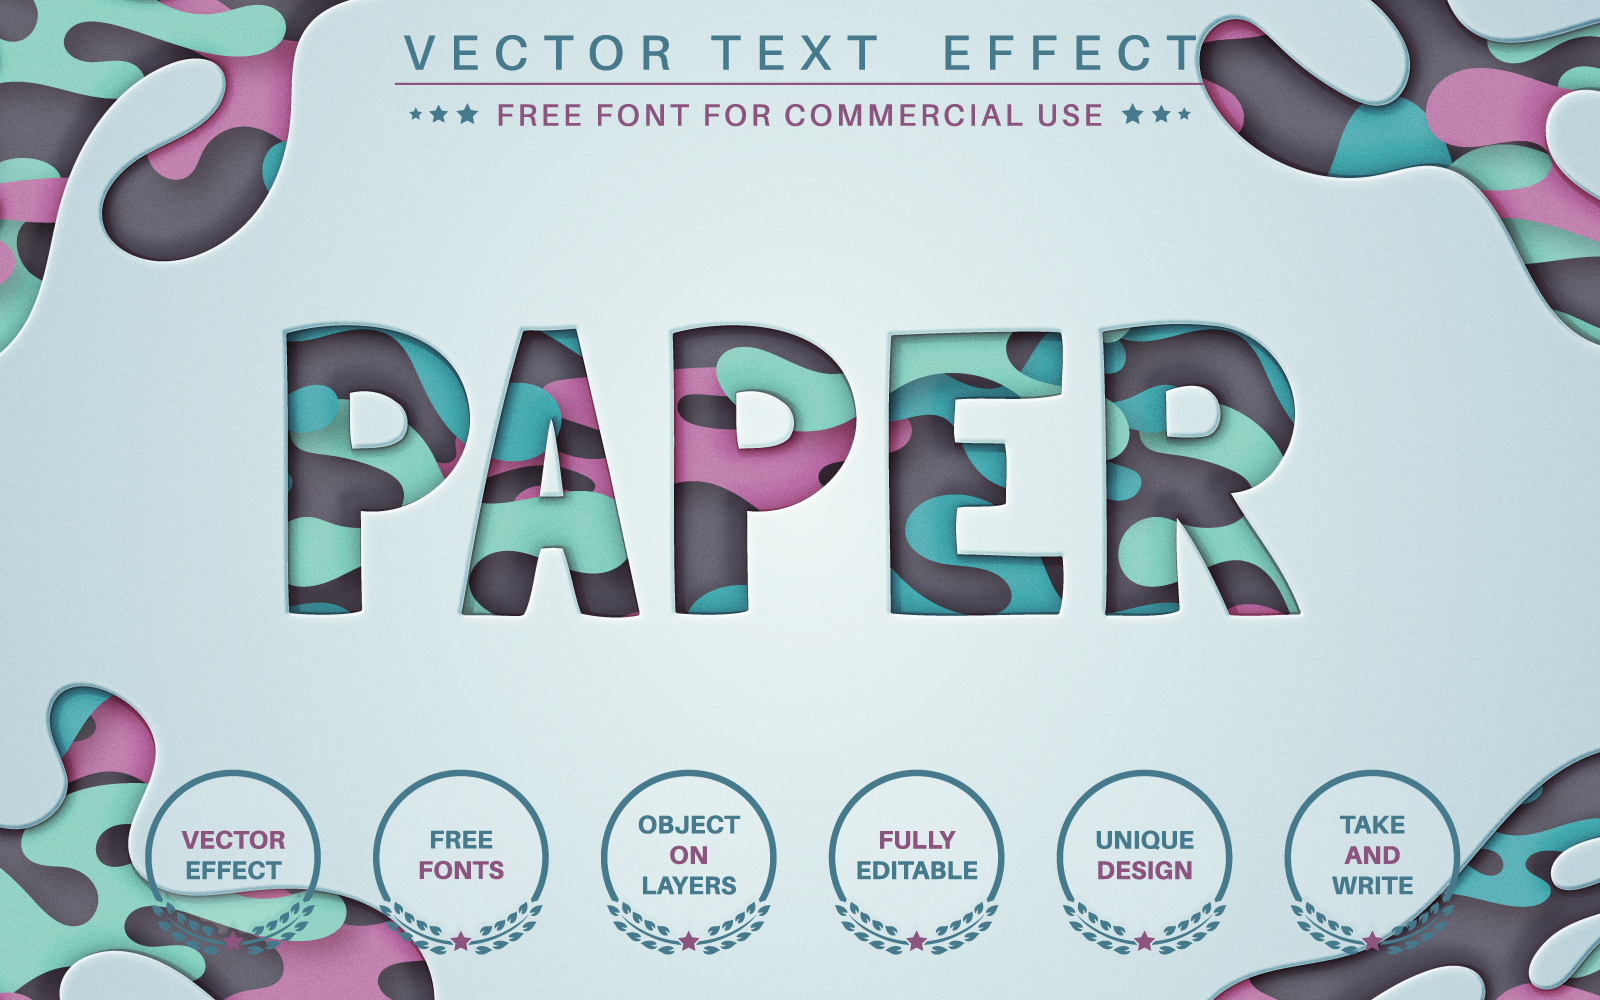 Cut paper - Editable Text Effect,  Font Style Graphic Illustration